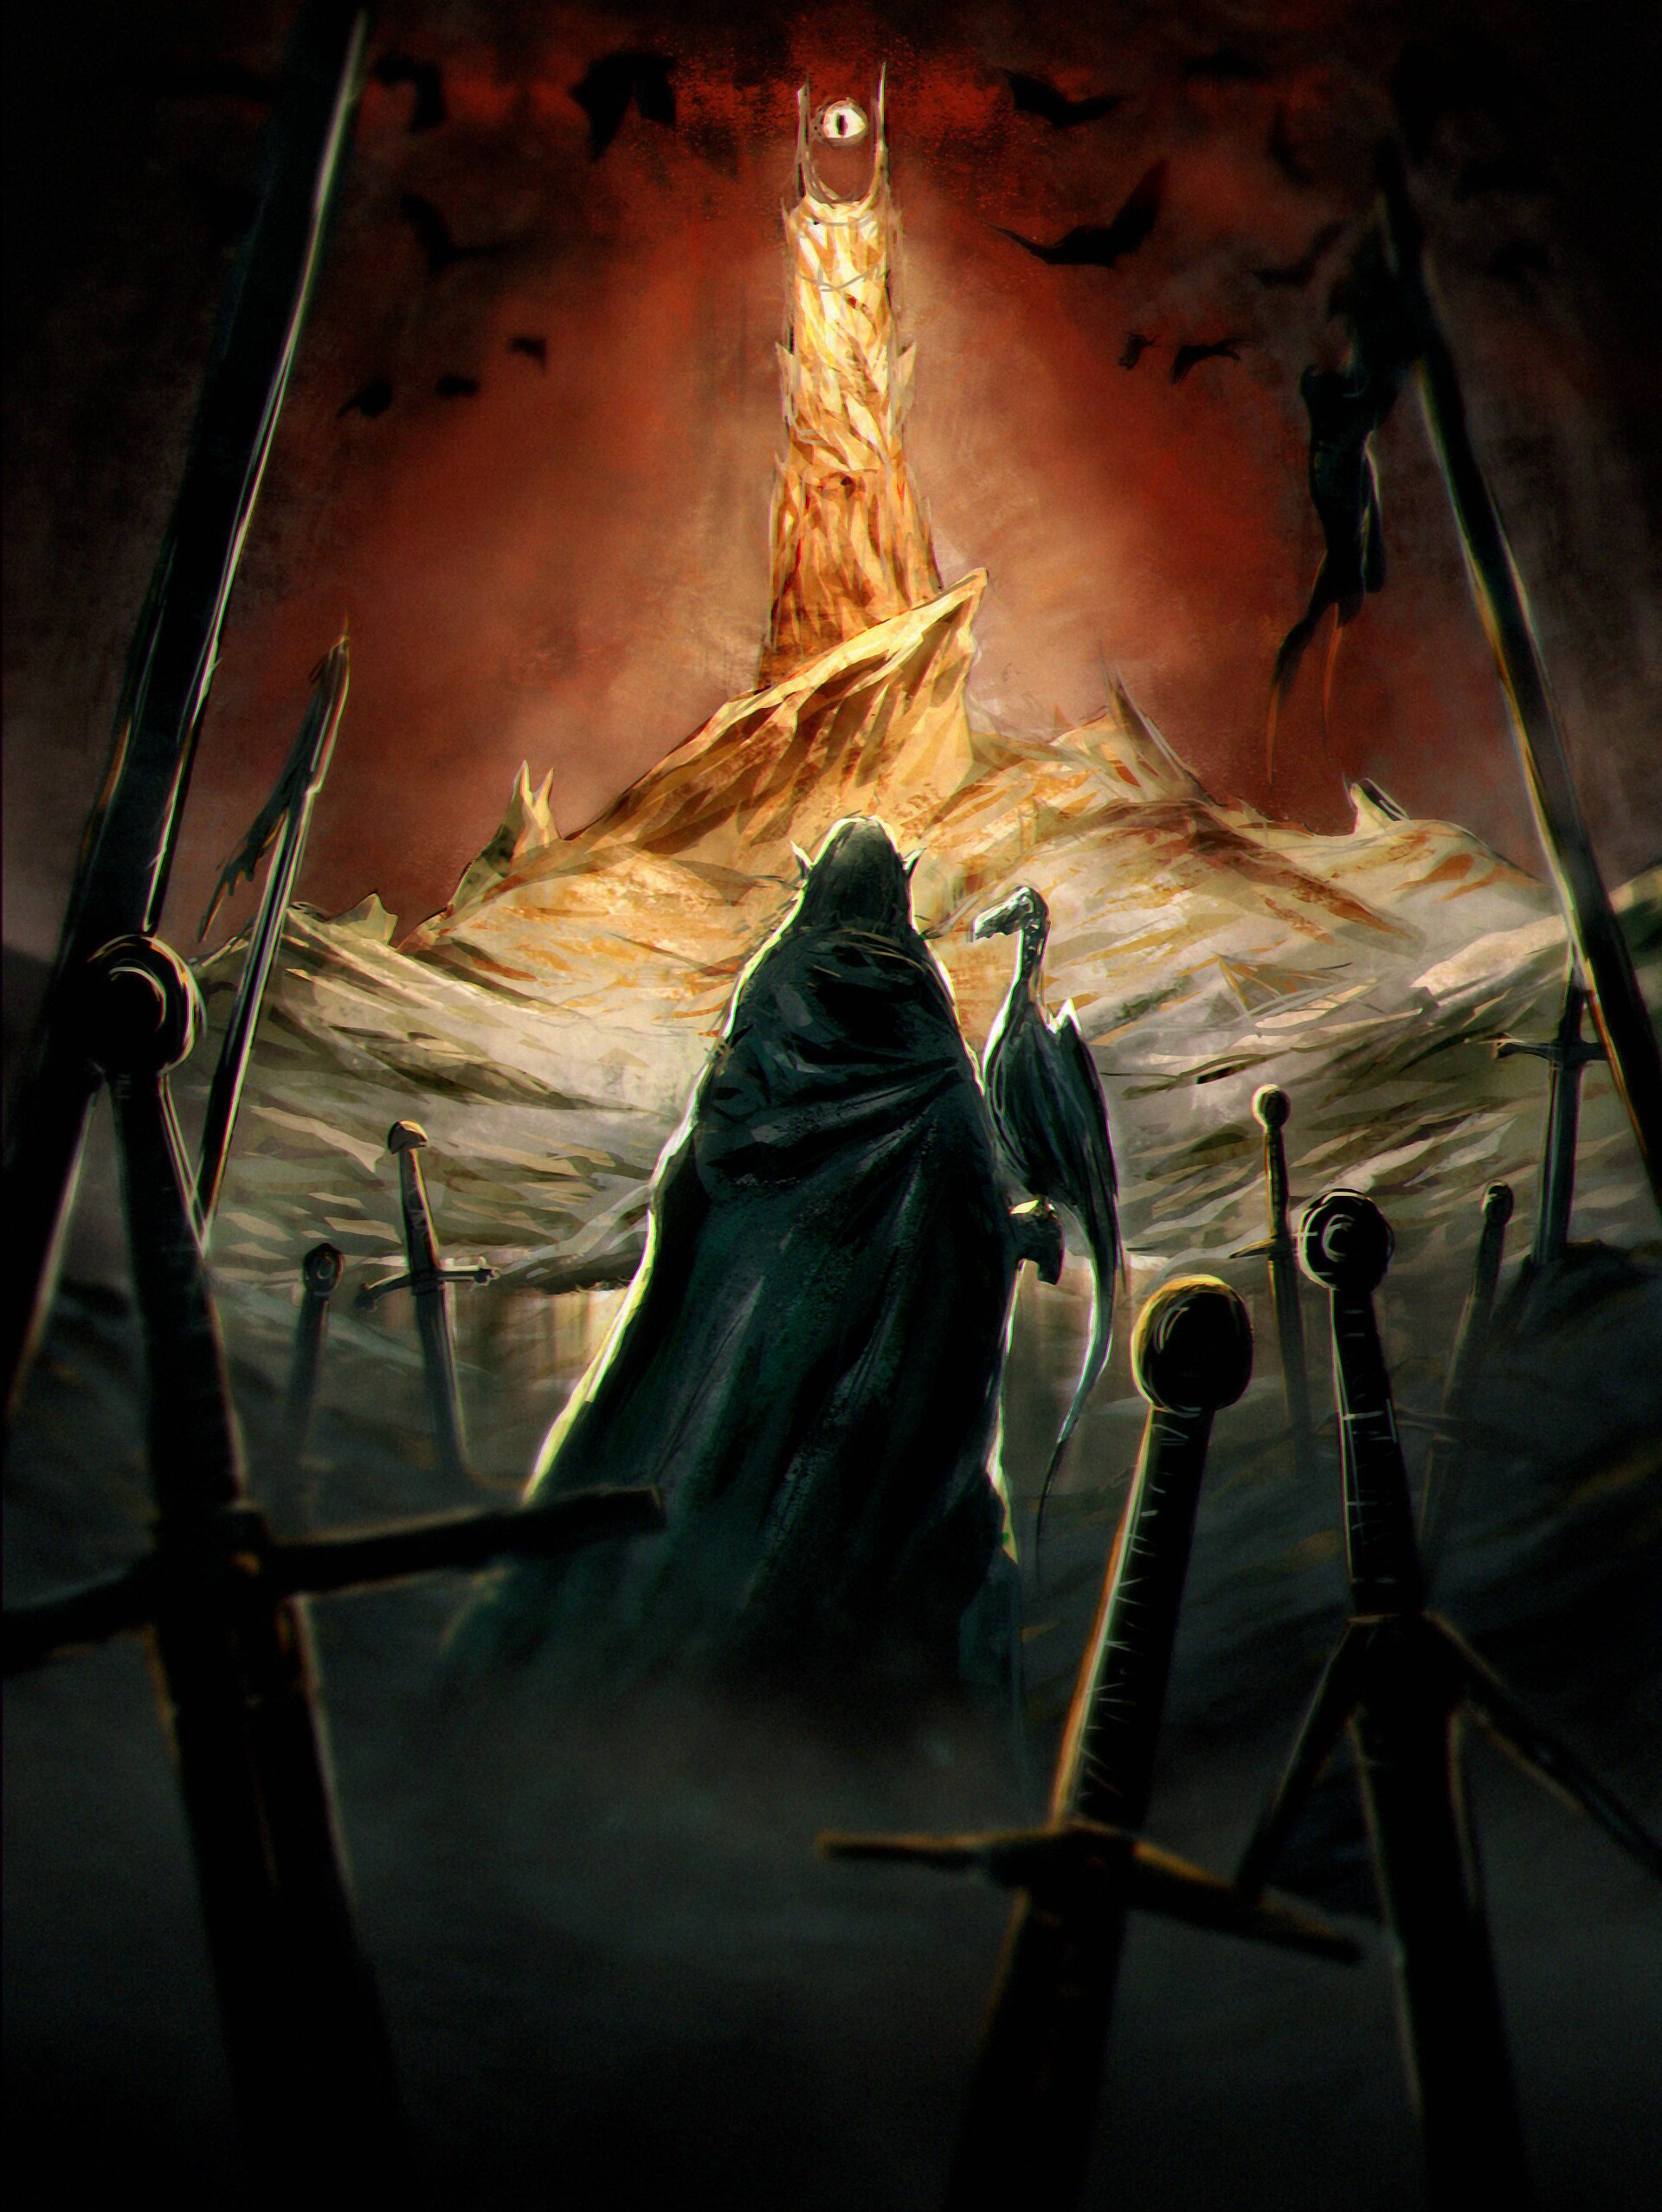 ArtStation - Lord of the Rings Book Cover Art Illustration (No Spoiler)